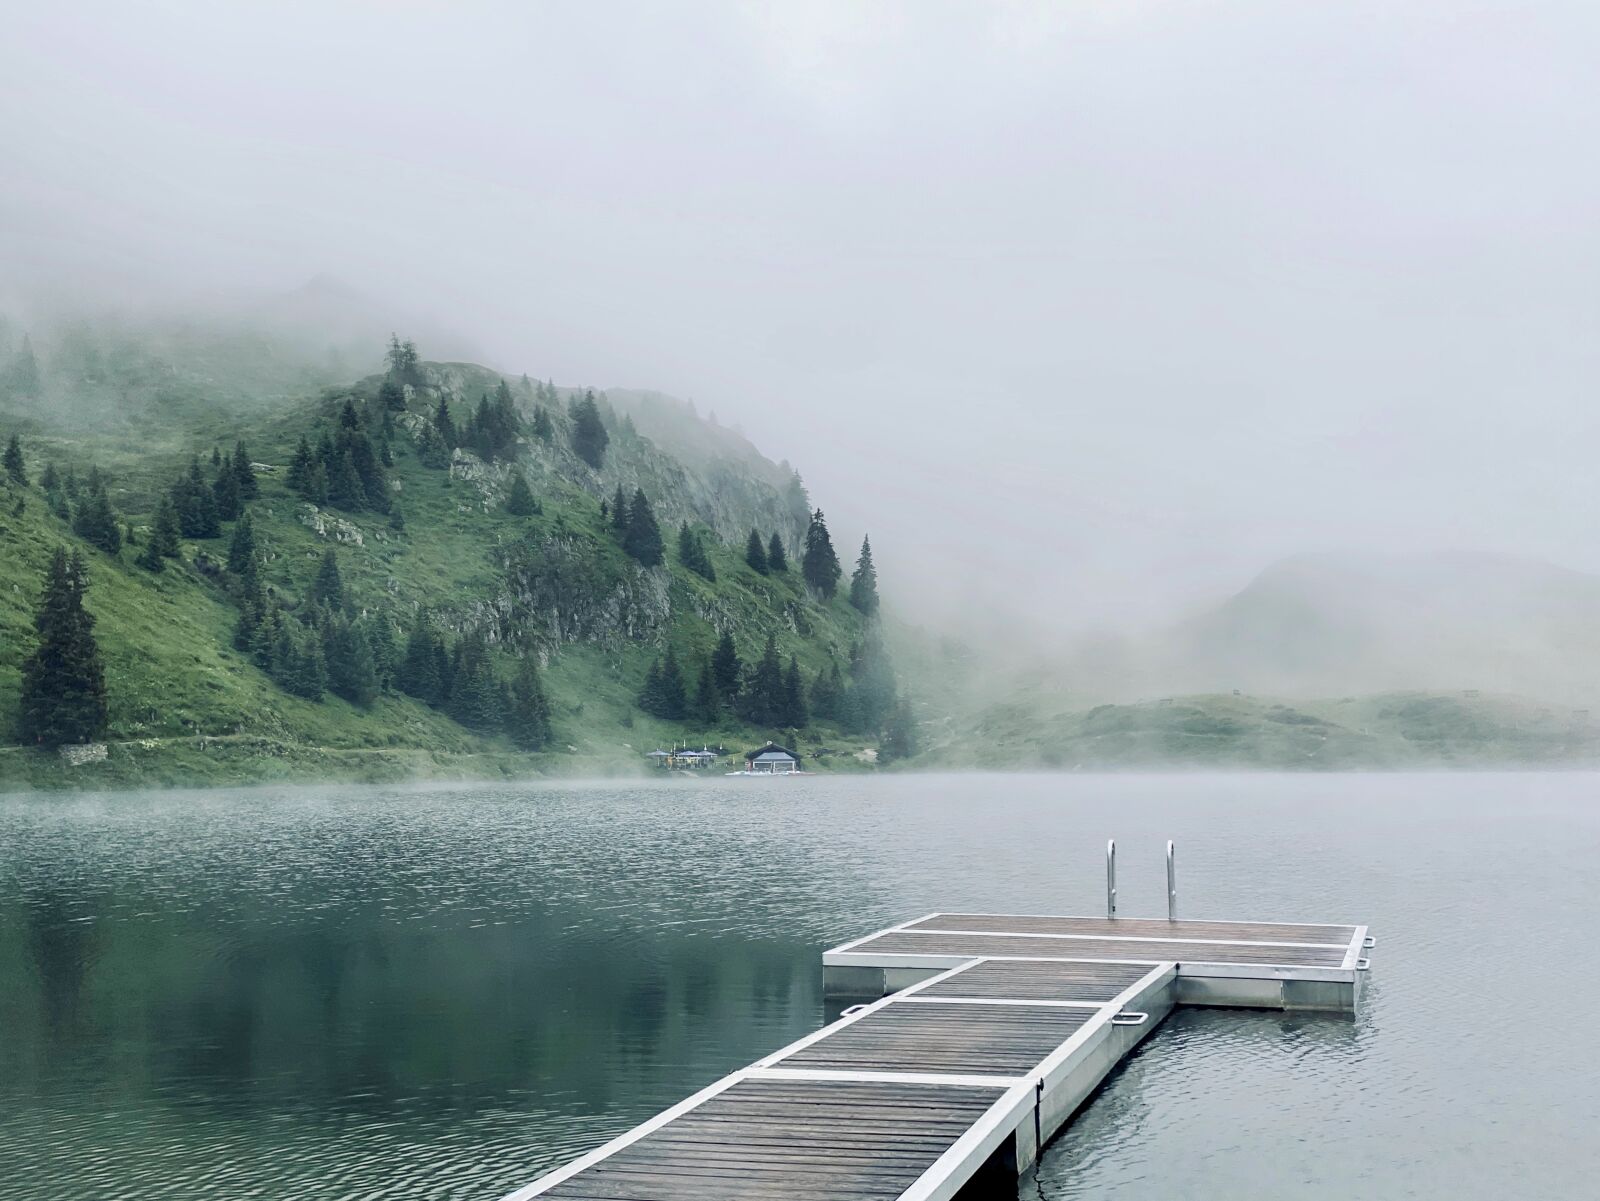 iPhone 11 Pro Max back triple camera 6mm f/2 sample photo. Bergsee, fog, nature photography